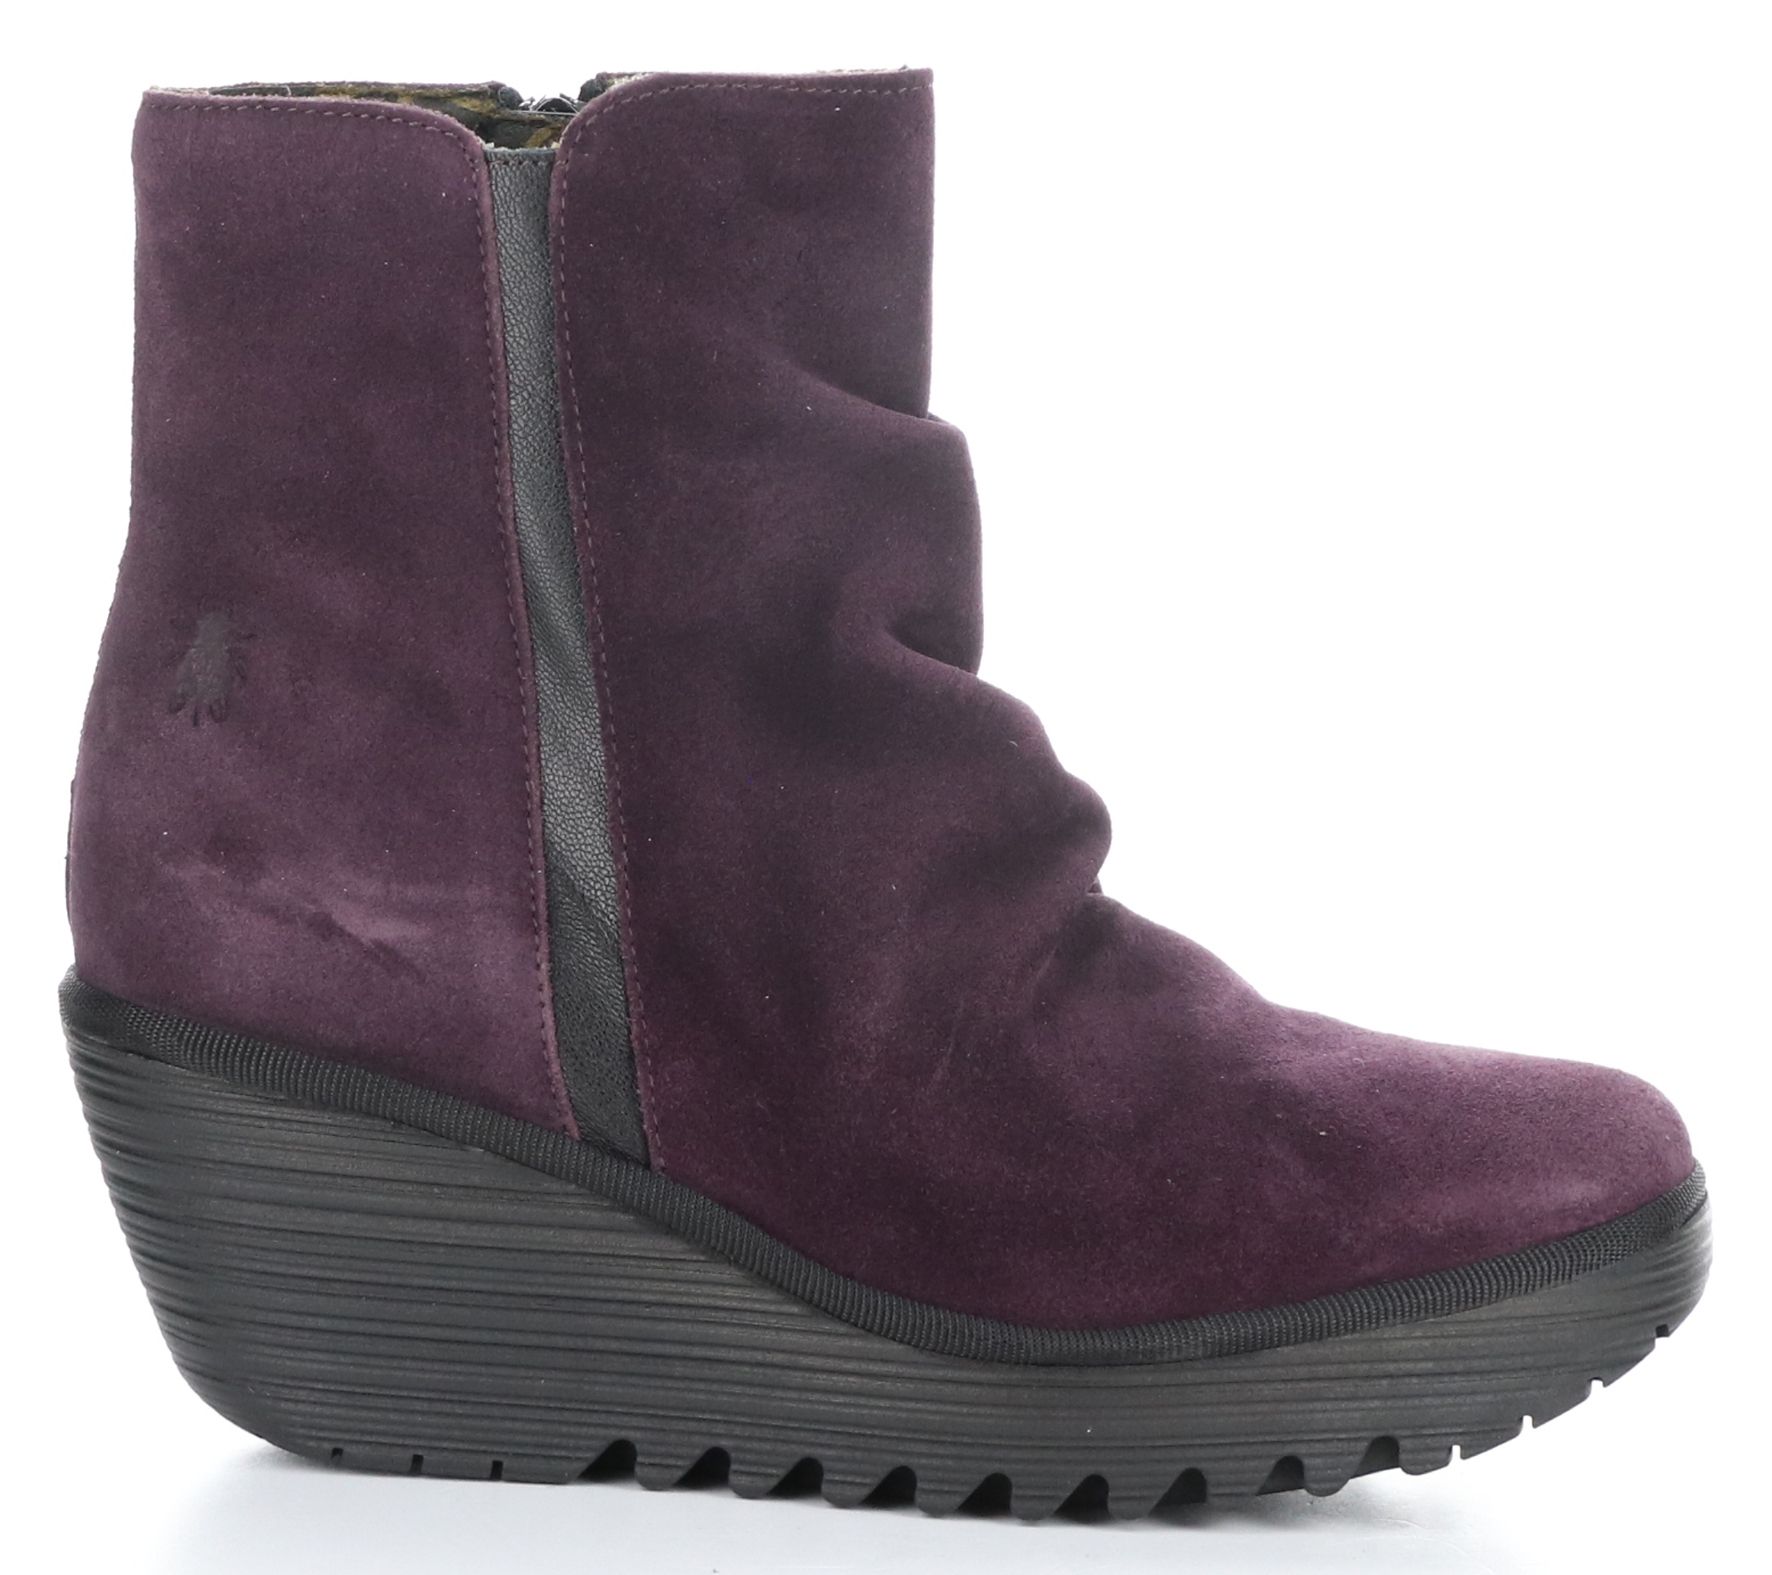 Fly London Suede Boots - Yopa - QVC.com